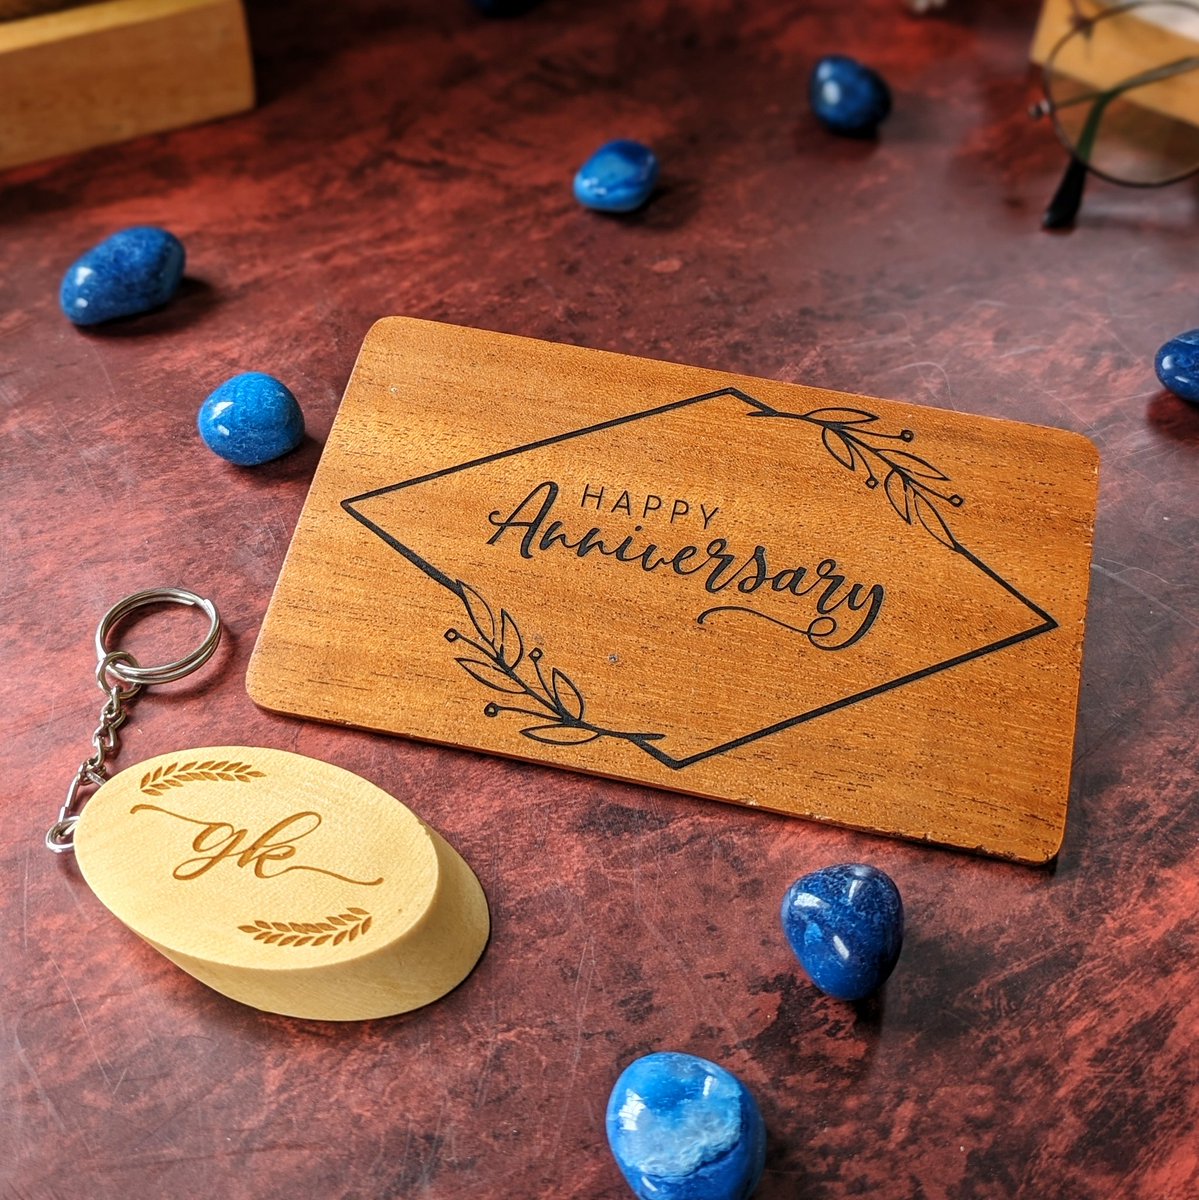 Make your Woodgeek gift truly unique! Personalize a wooden greeting card and key ring with a custom engraved message - the perfect finishing touch for your gift.

#woodgeek #woodgeekstore #greetingcards #woodencards #woodenkeychain #giftideas #woodengifts #personalizedgifts